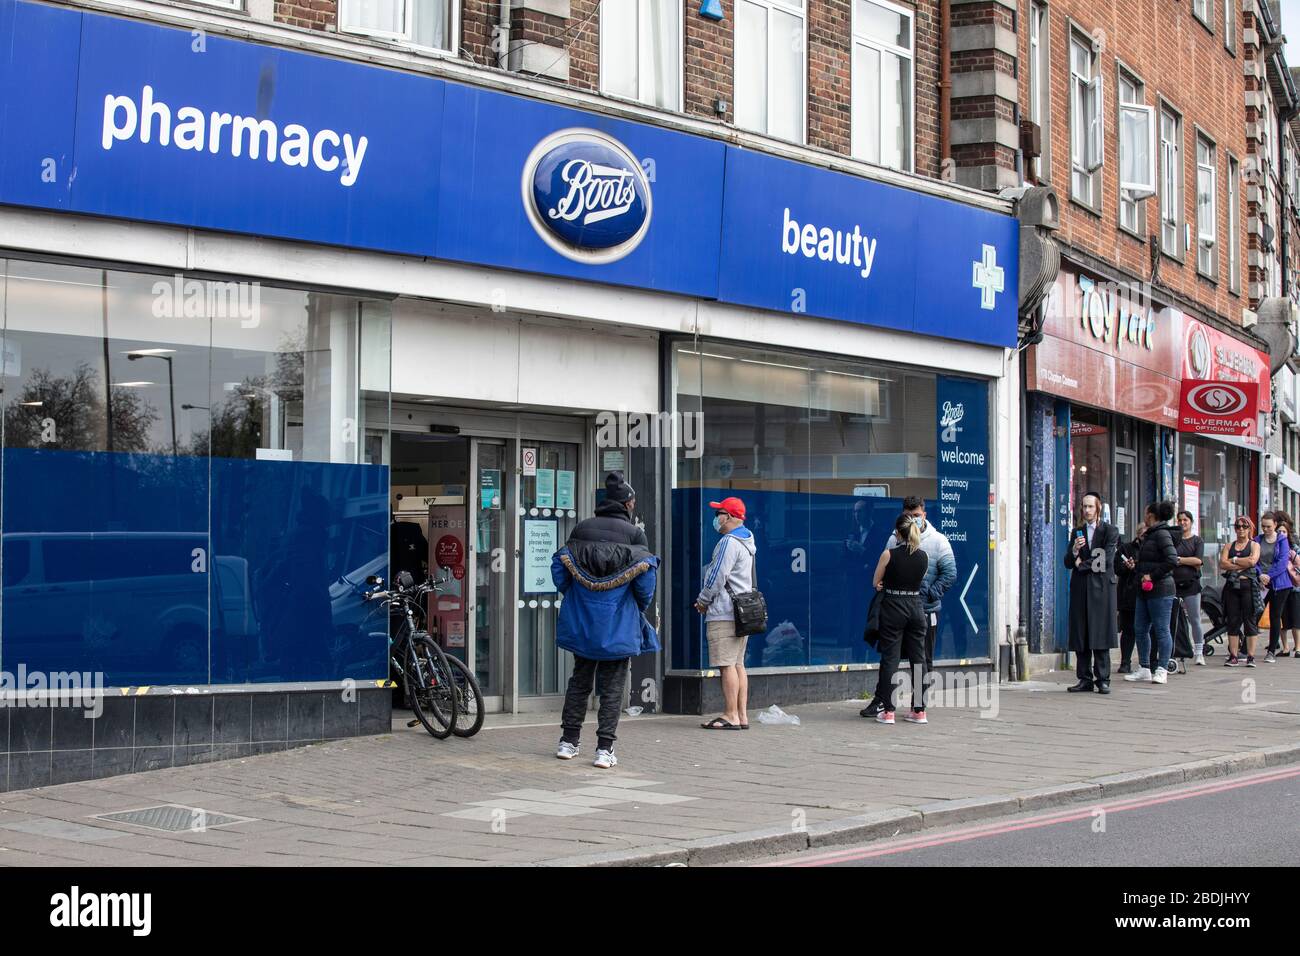 People queue outside a Boots Pharmacy in Stamford Hill, North London, during the COVID-19 lockdown, London, England, UK Stock Photo